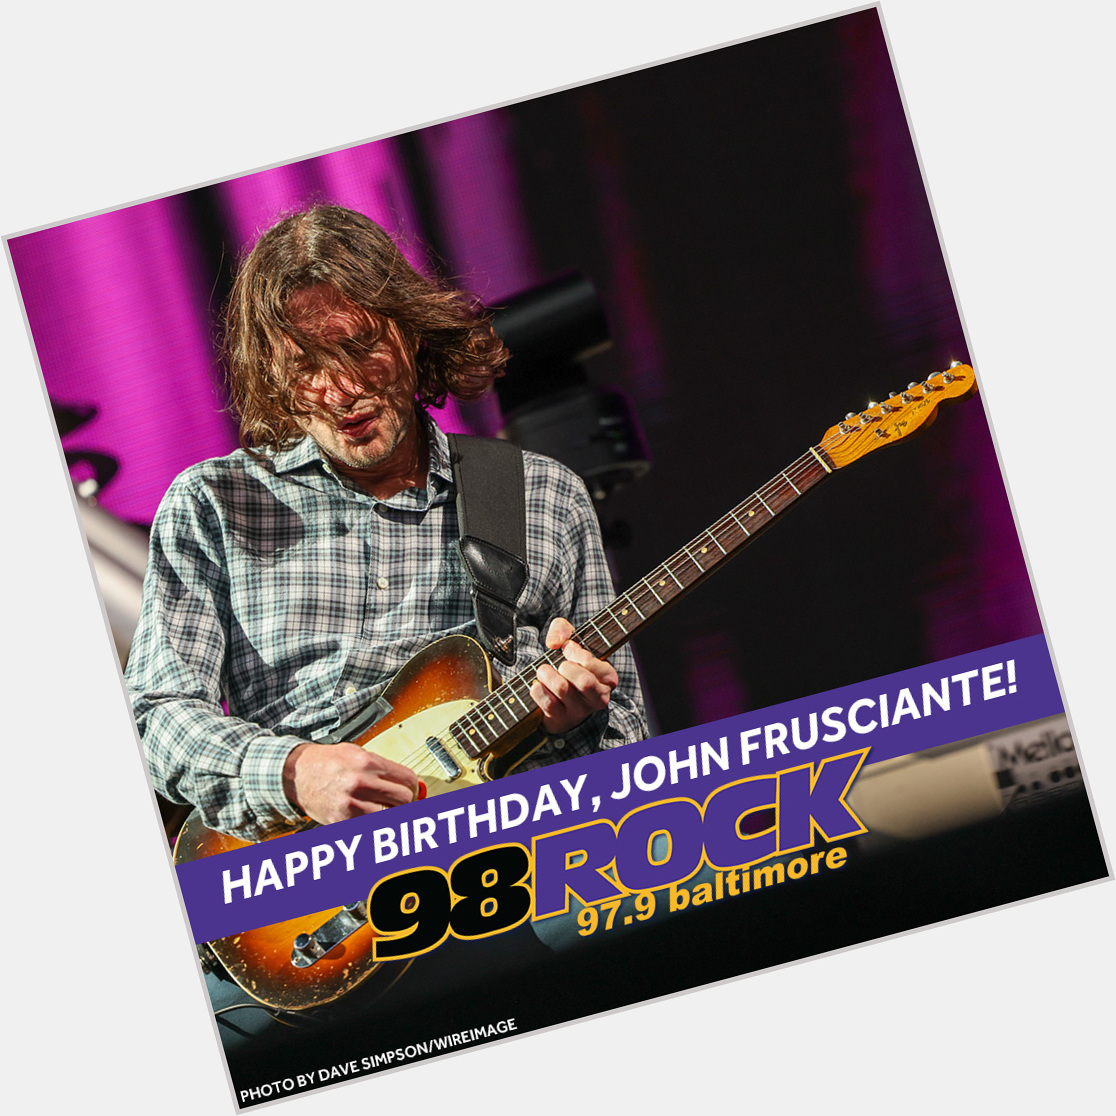 Happy Birthday to guitarist John Frusciante who turns 53 today! 